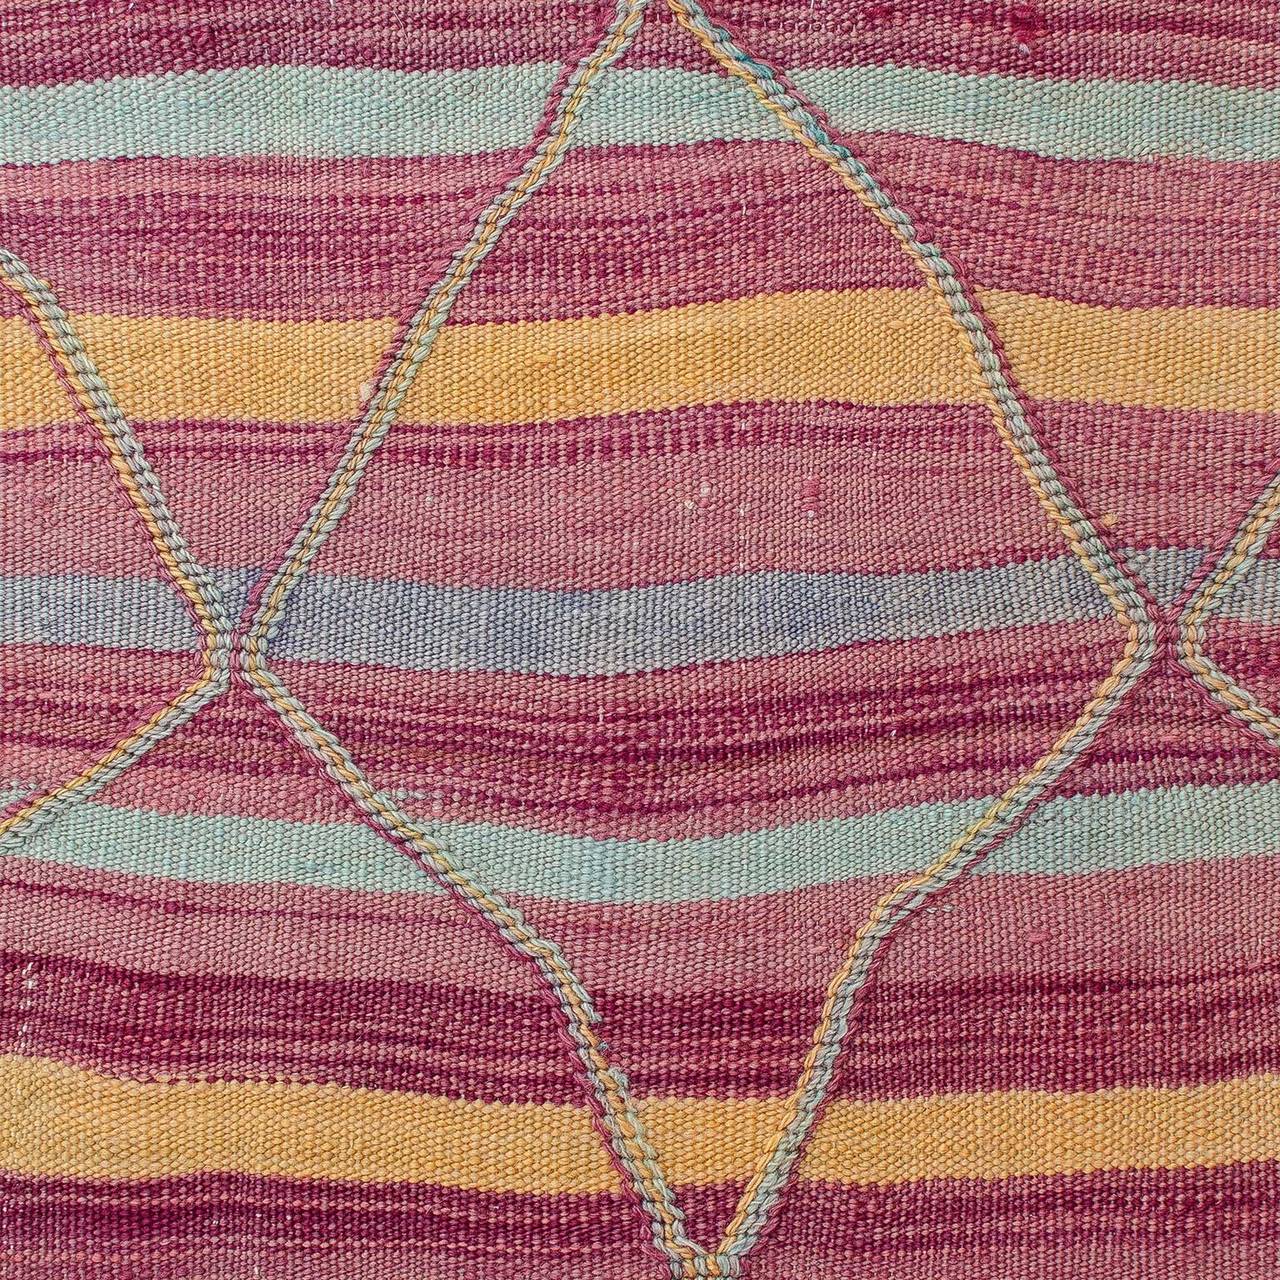 A Talsint hanbel (flat-weave) from the Ait Bou Ichaouen tribe with a woven lozenge network raised slightly above the surface, creating a textural chainlike effect overlaying the striped field. Colorful palette includes magenta or purple, and pale